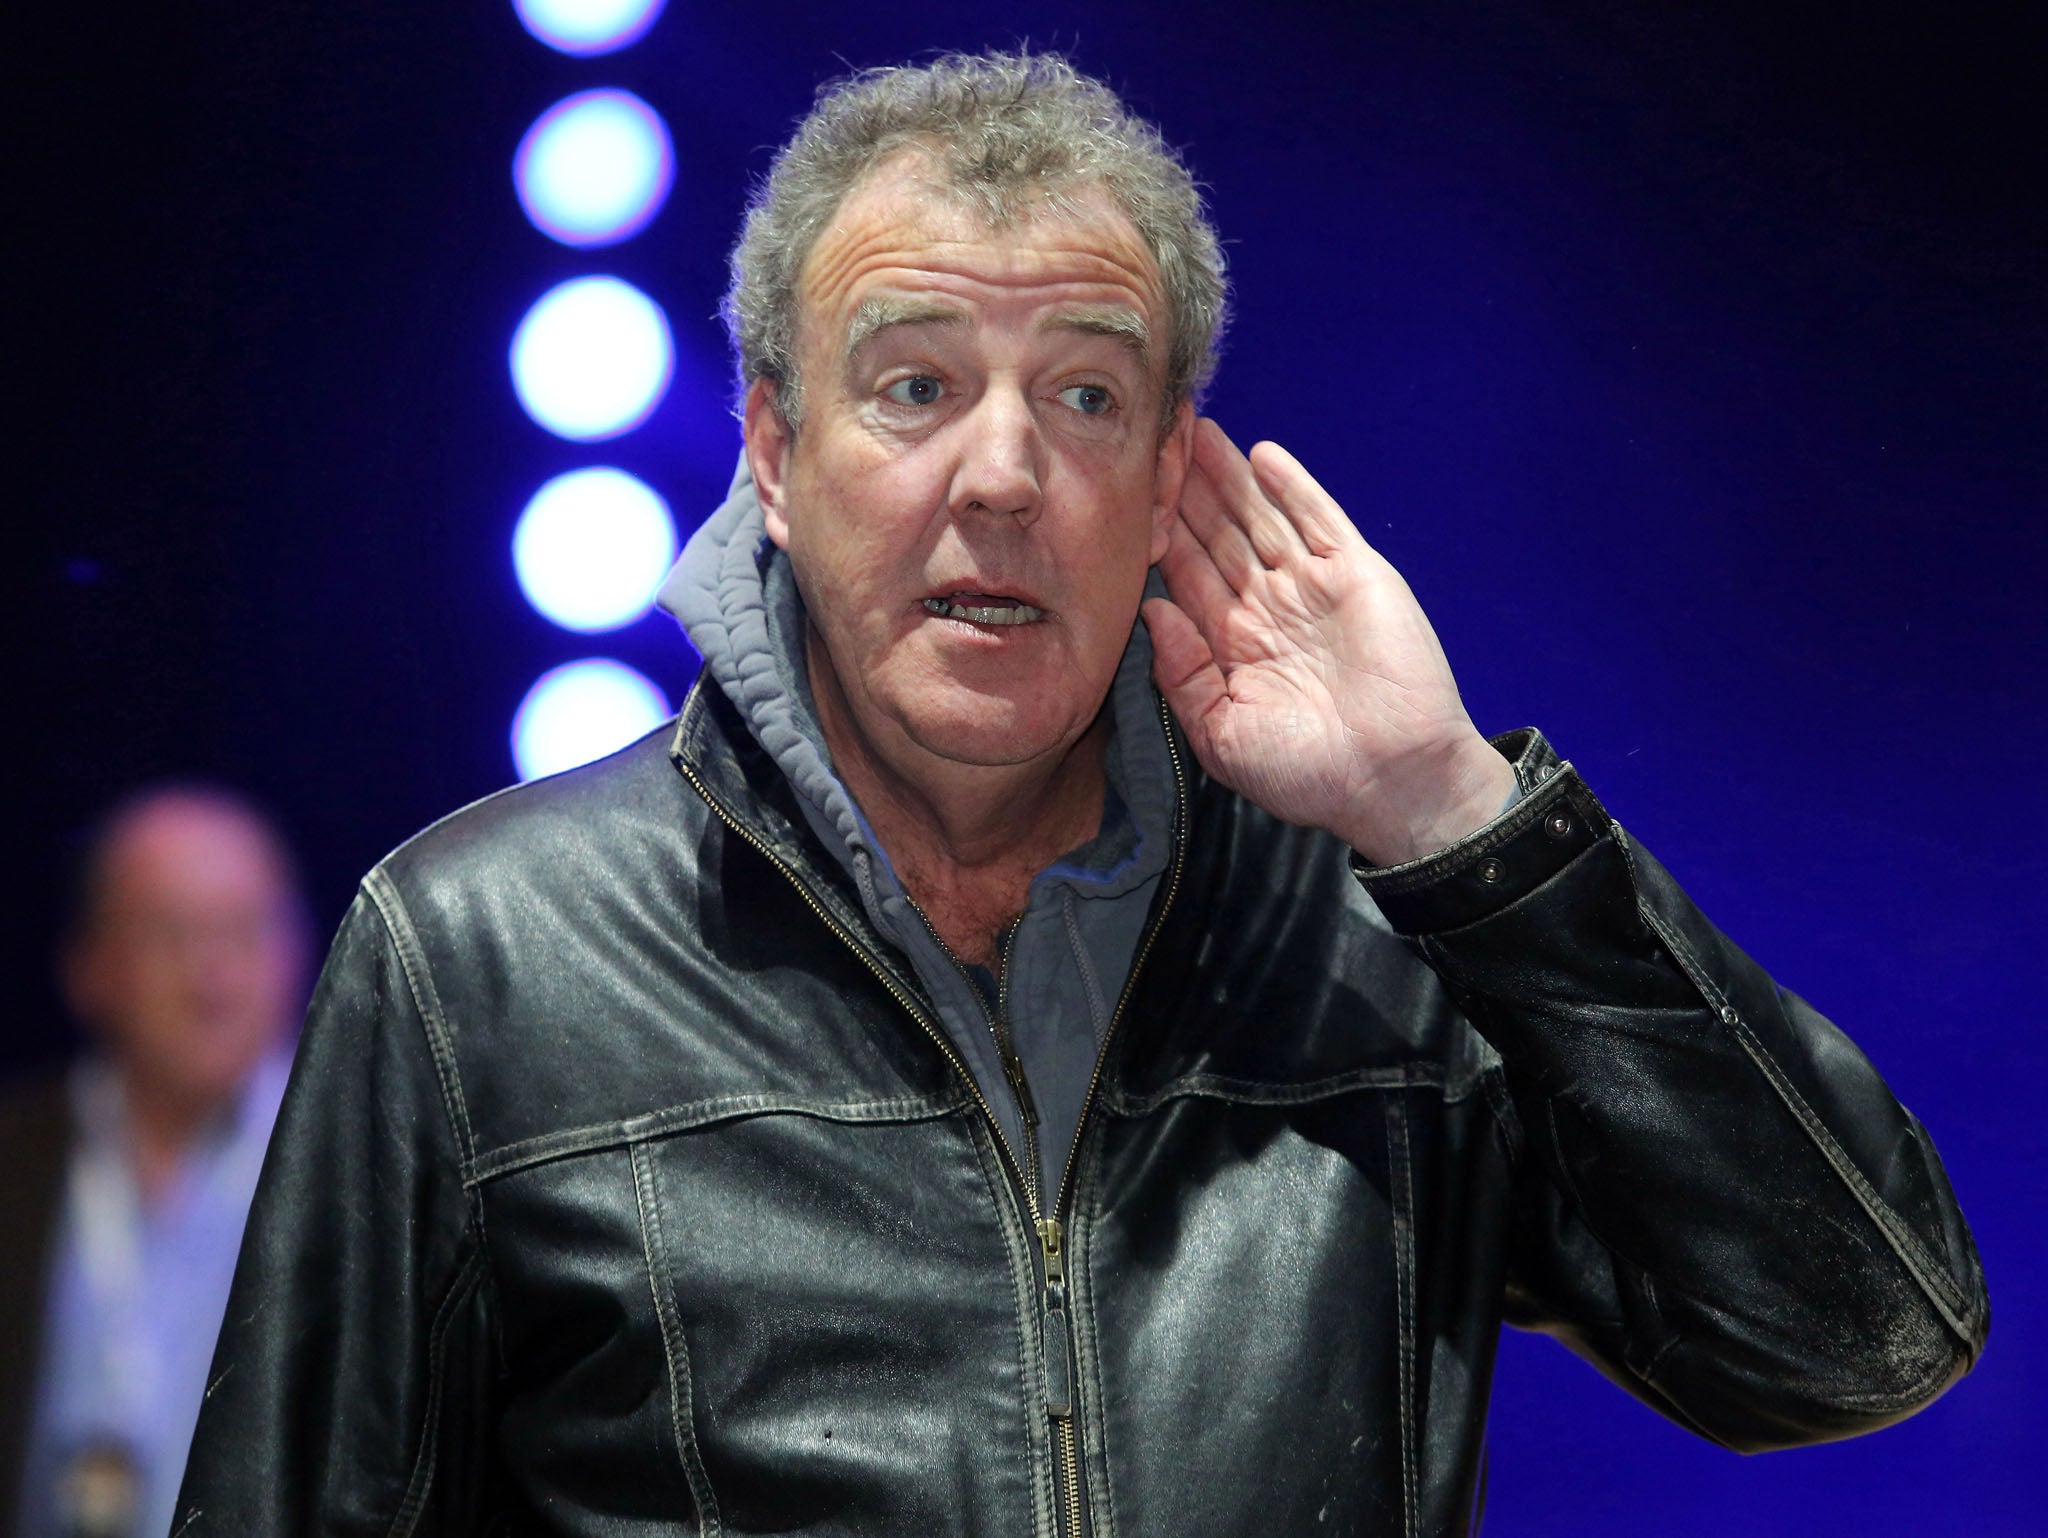 Clarkson and co are legally forbidden from calling their new car show anything involving 'gear'